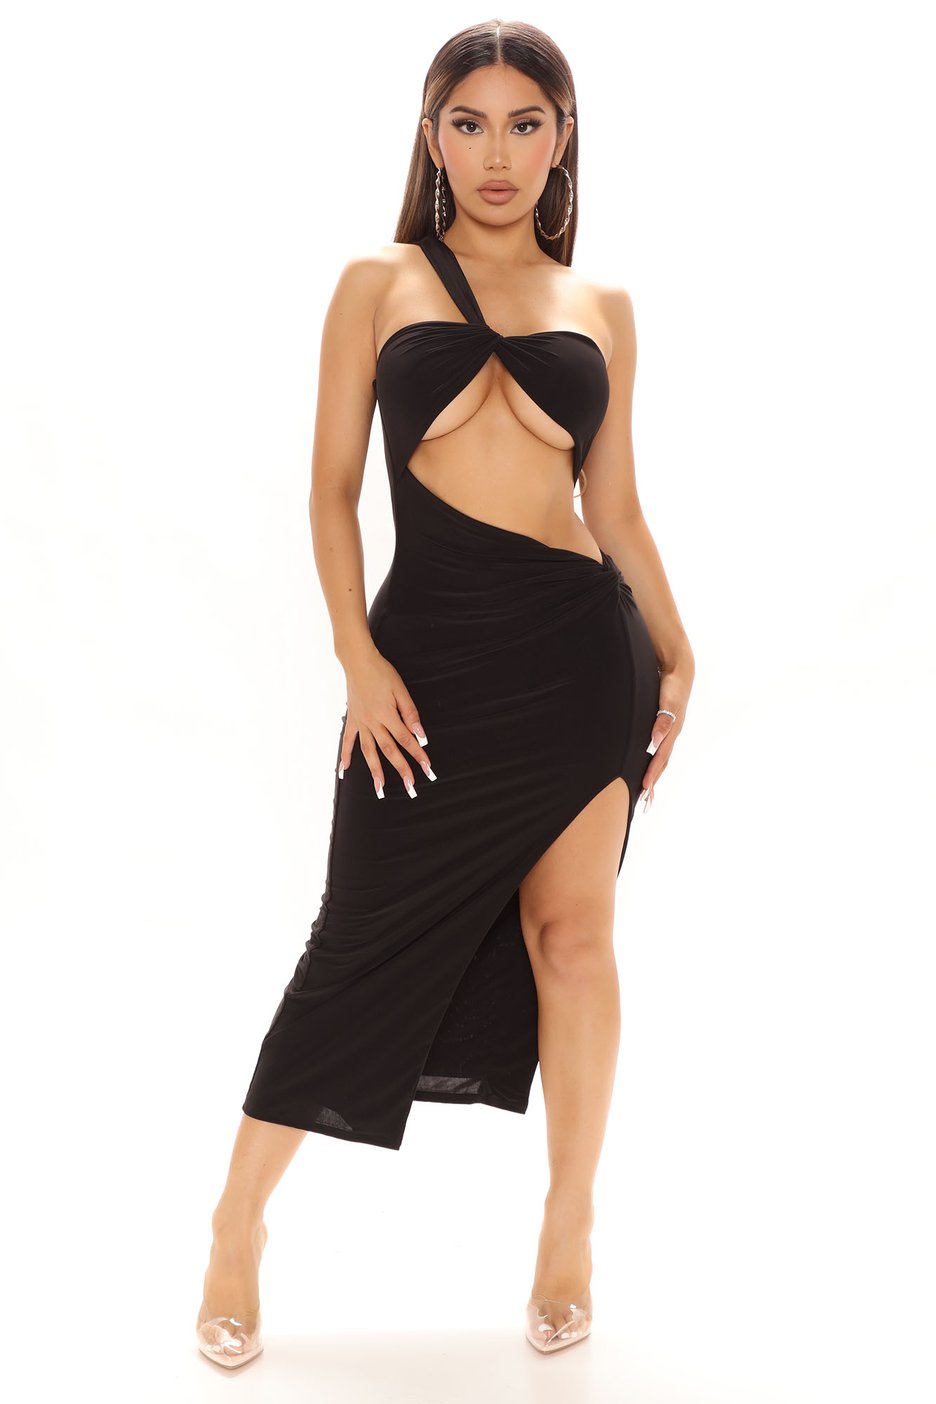 Draya Michele Delivers a Style Moment in Fashion Nova Black One Shoulder Cutout Dress2